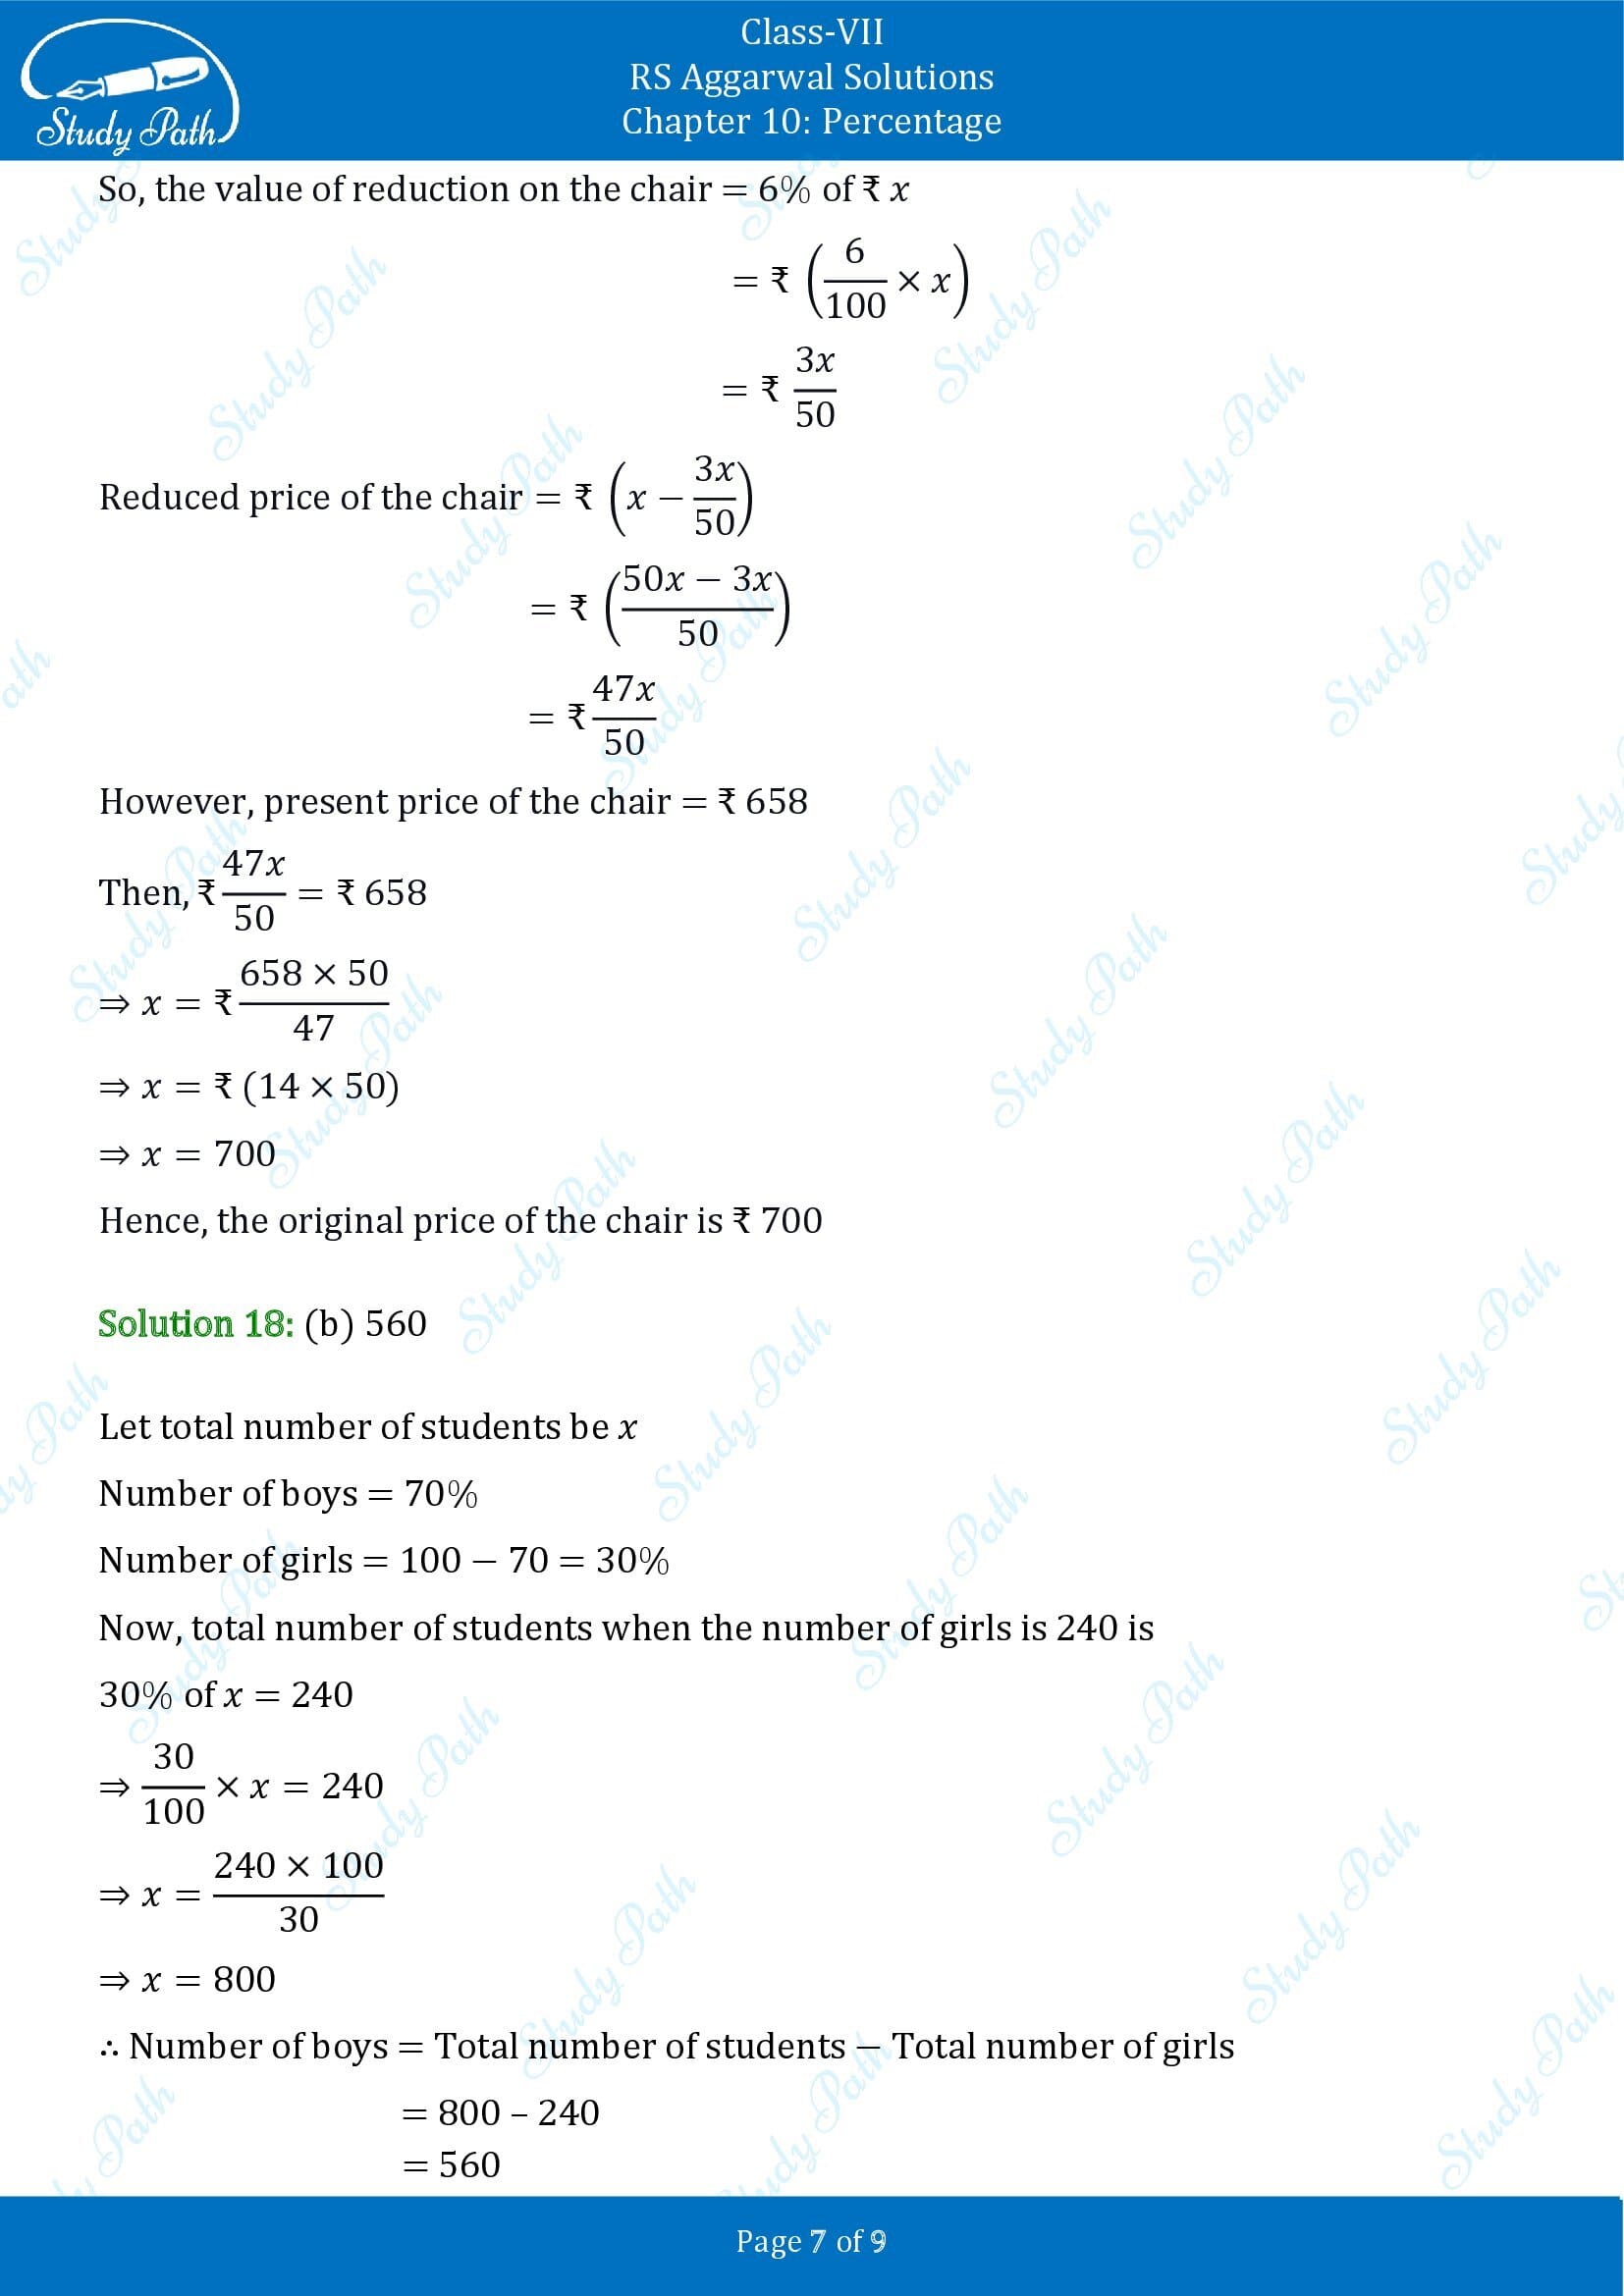 RS Aggarwal Solutions Class 7 Chapter 10 Percentage Exercise 10C MCQ 007